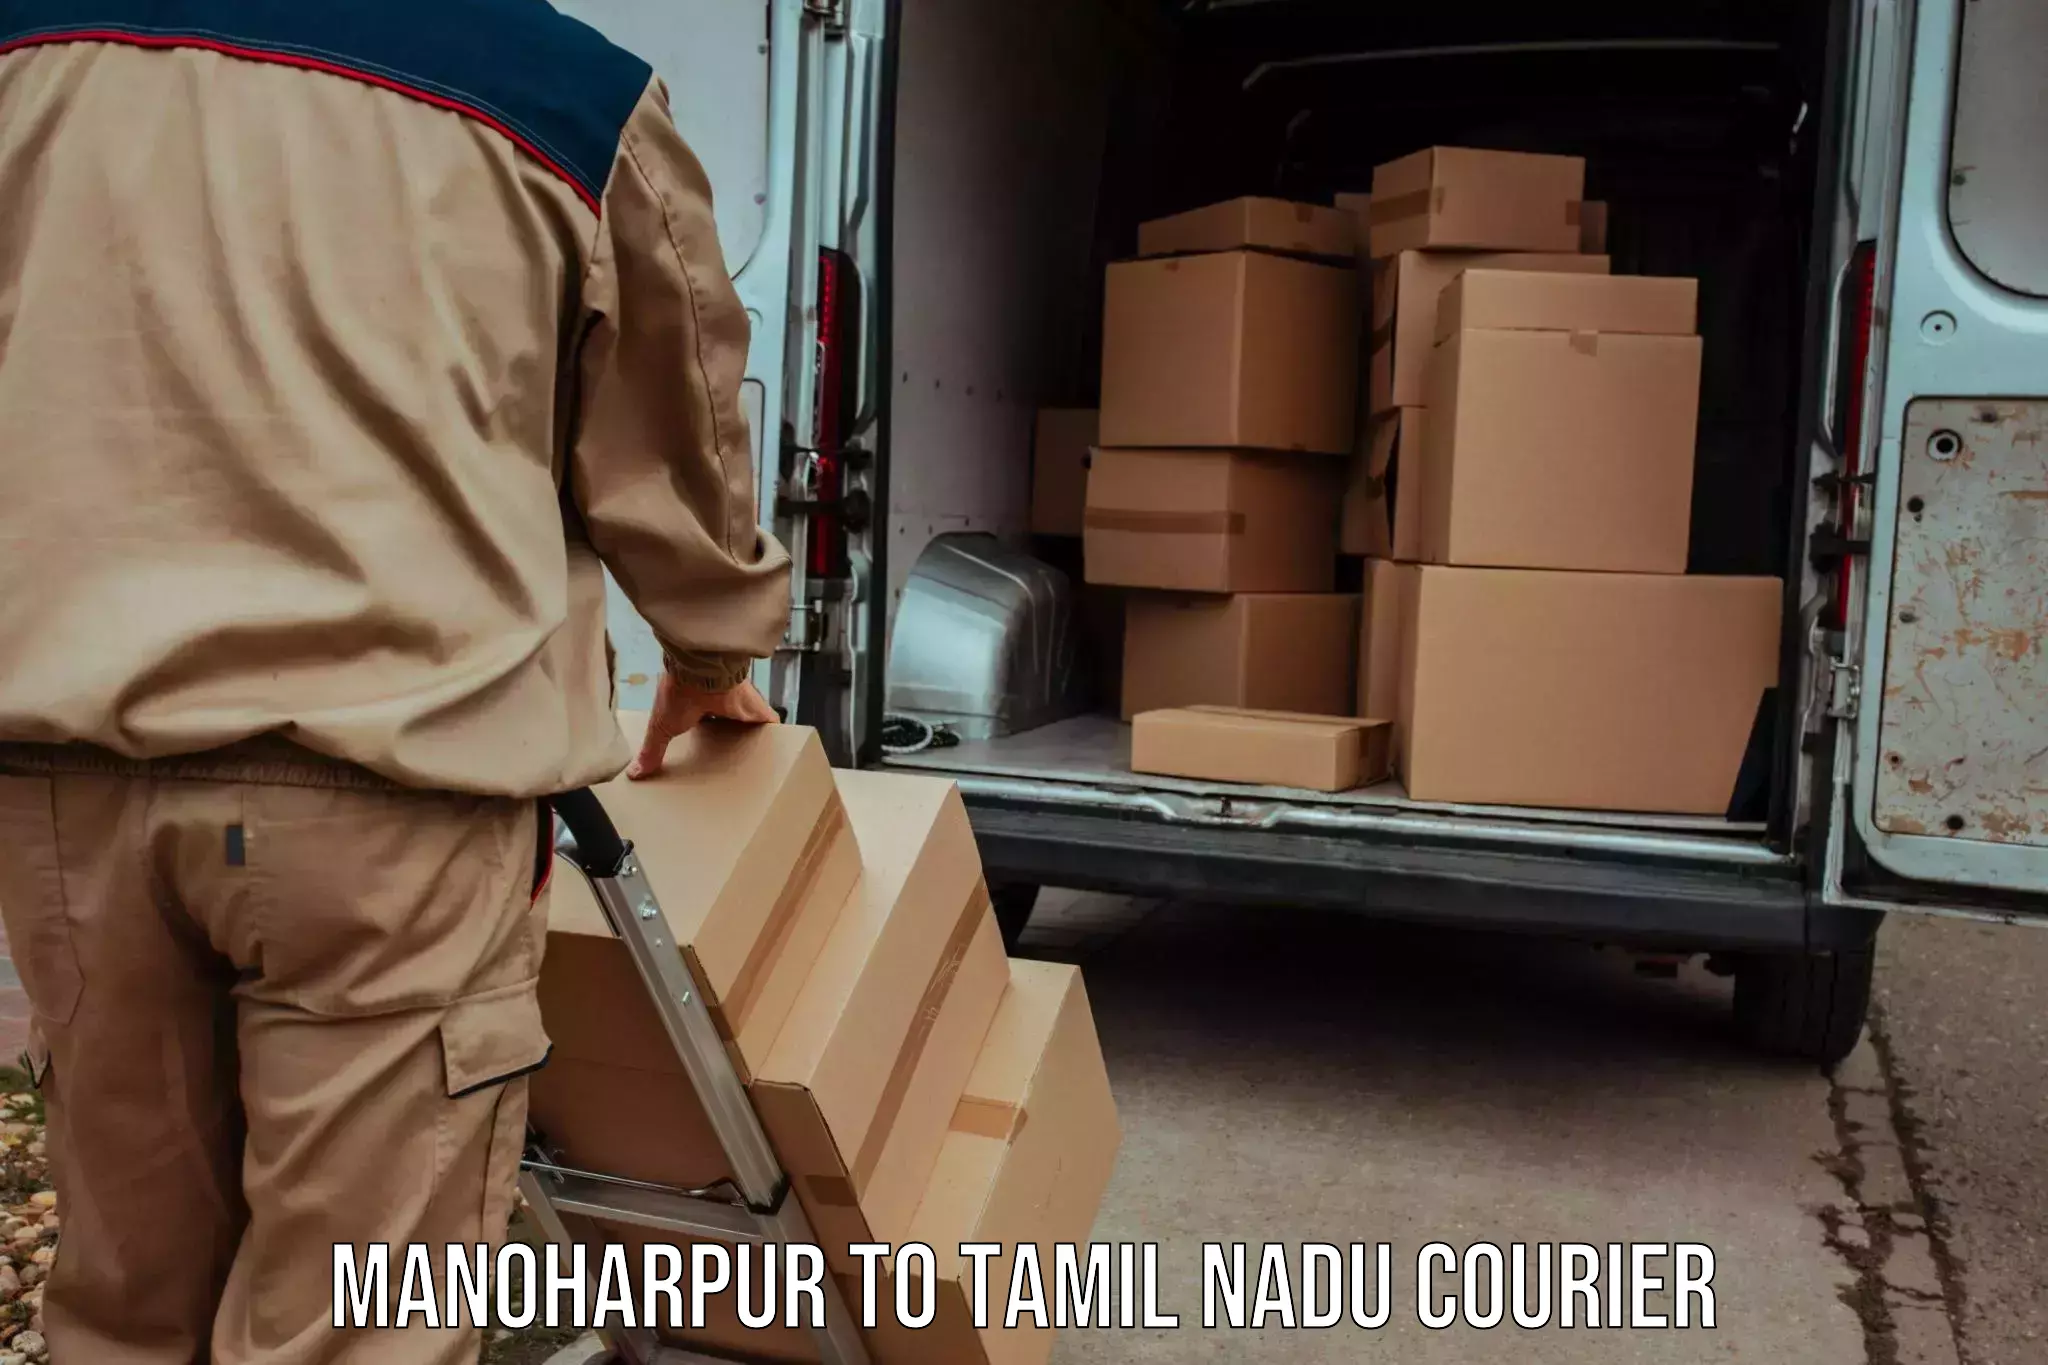 Next-day freight services Manoharpur to Sri Ramachandra Institute of Higher Education and Research Chennai